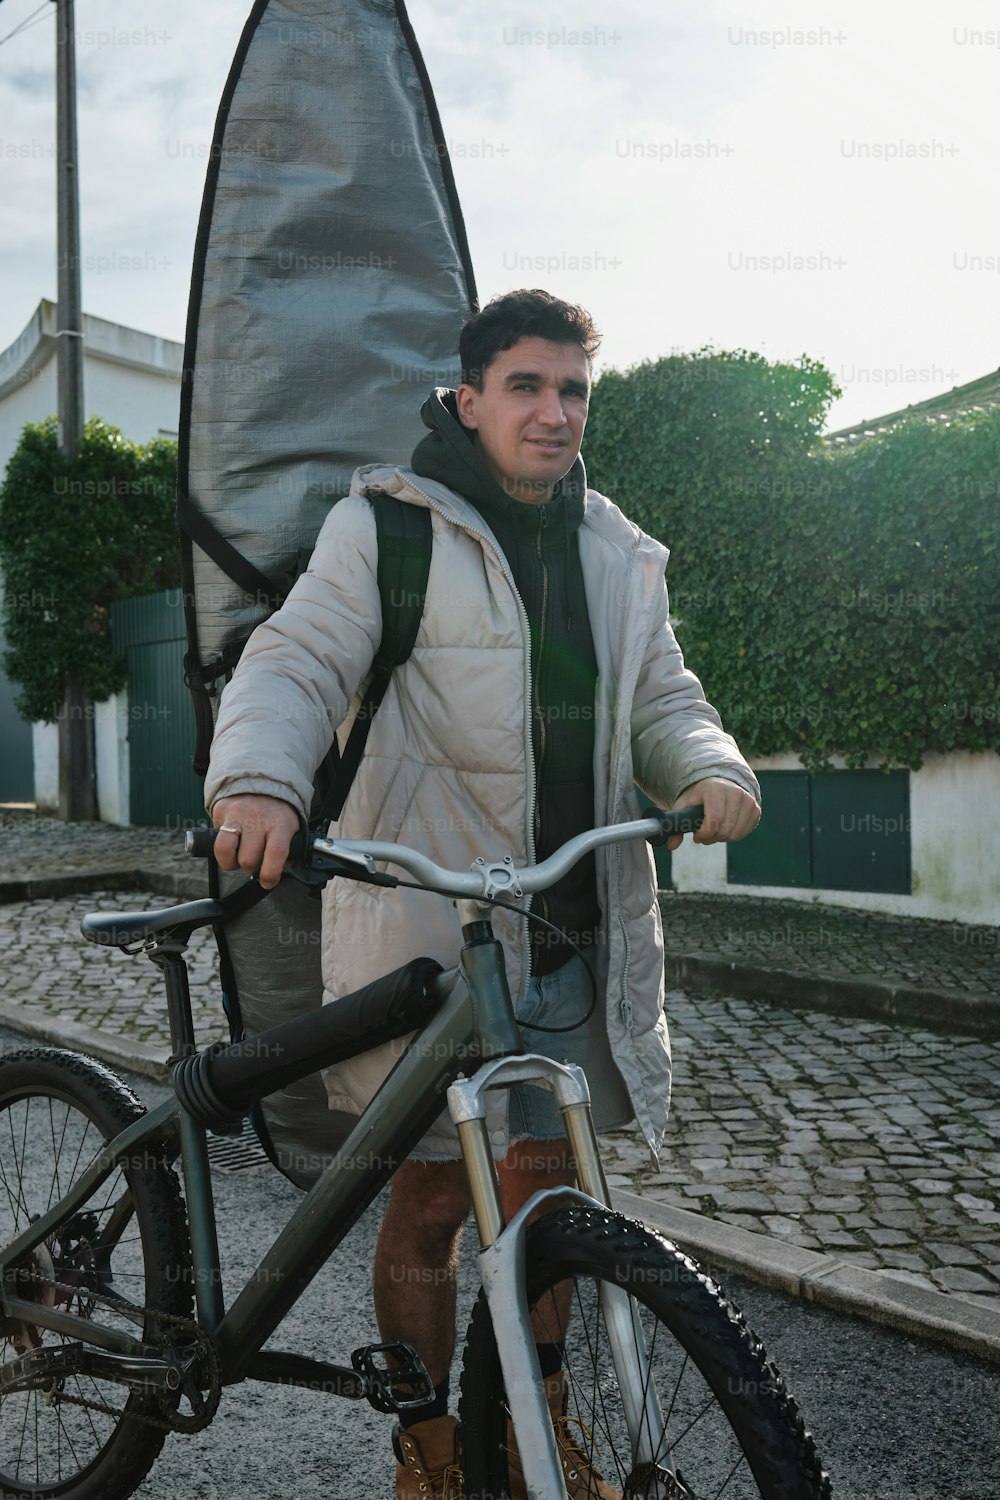 a man holding a bike with a surfboard strapped to it